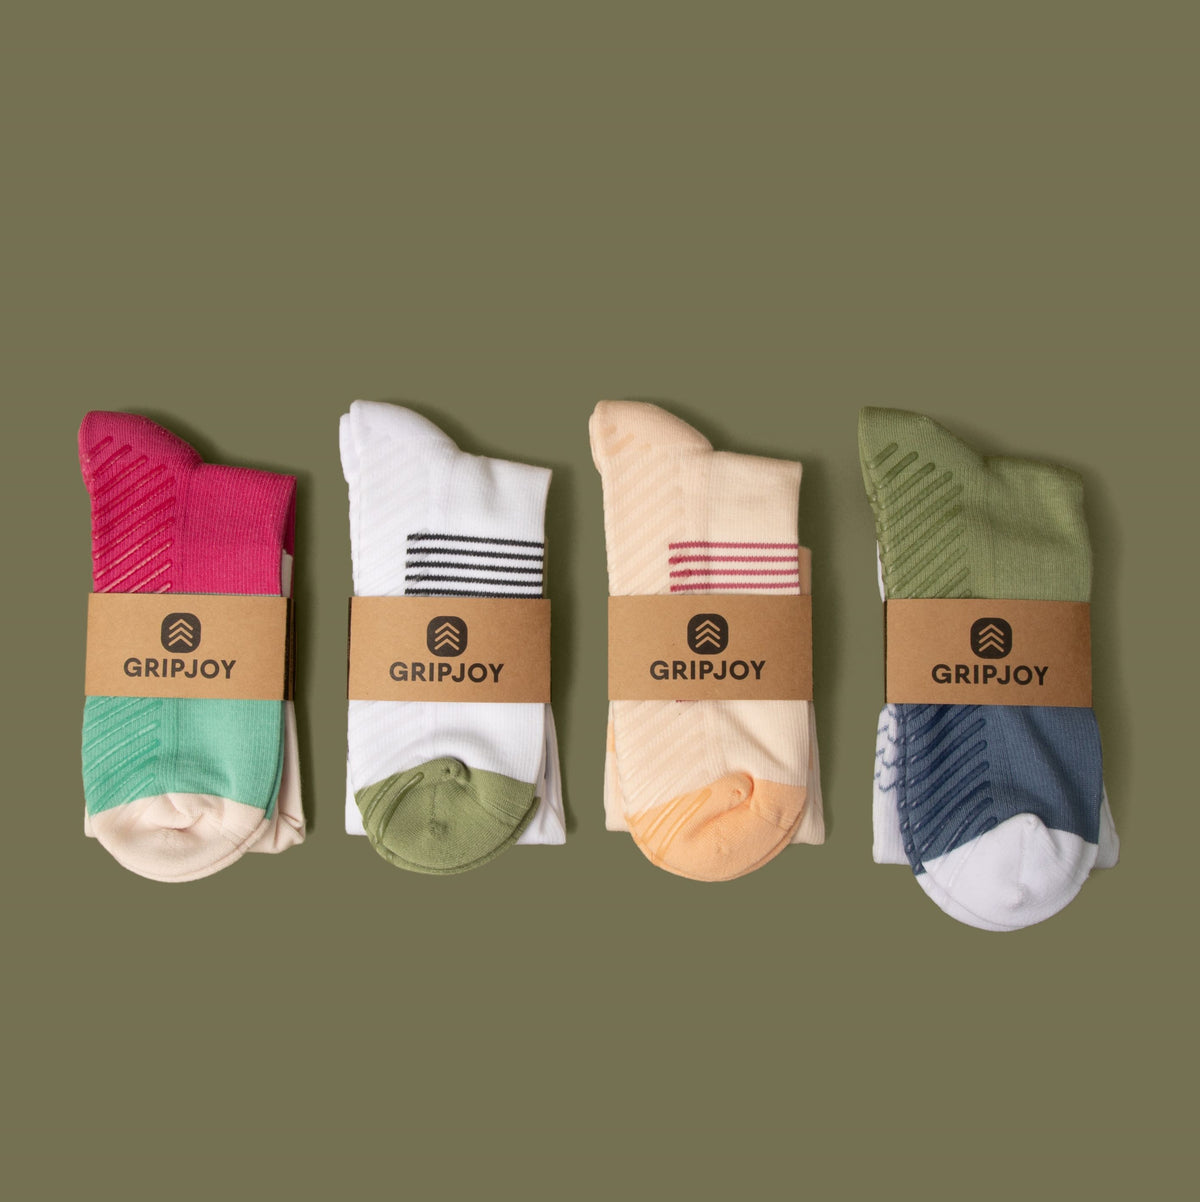 New Gripjoy Women's Low Cut Socks with Grips (Pack of 3)